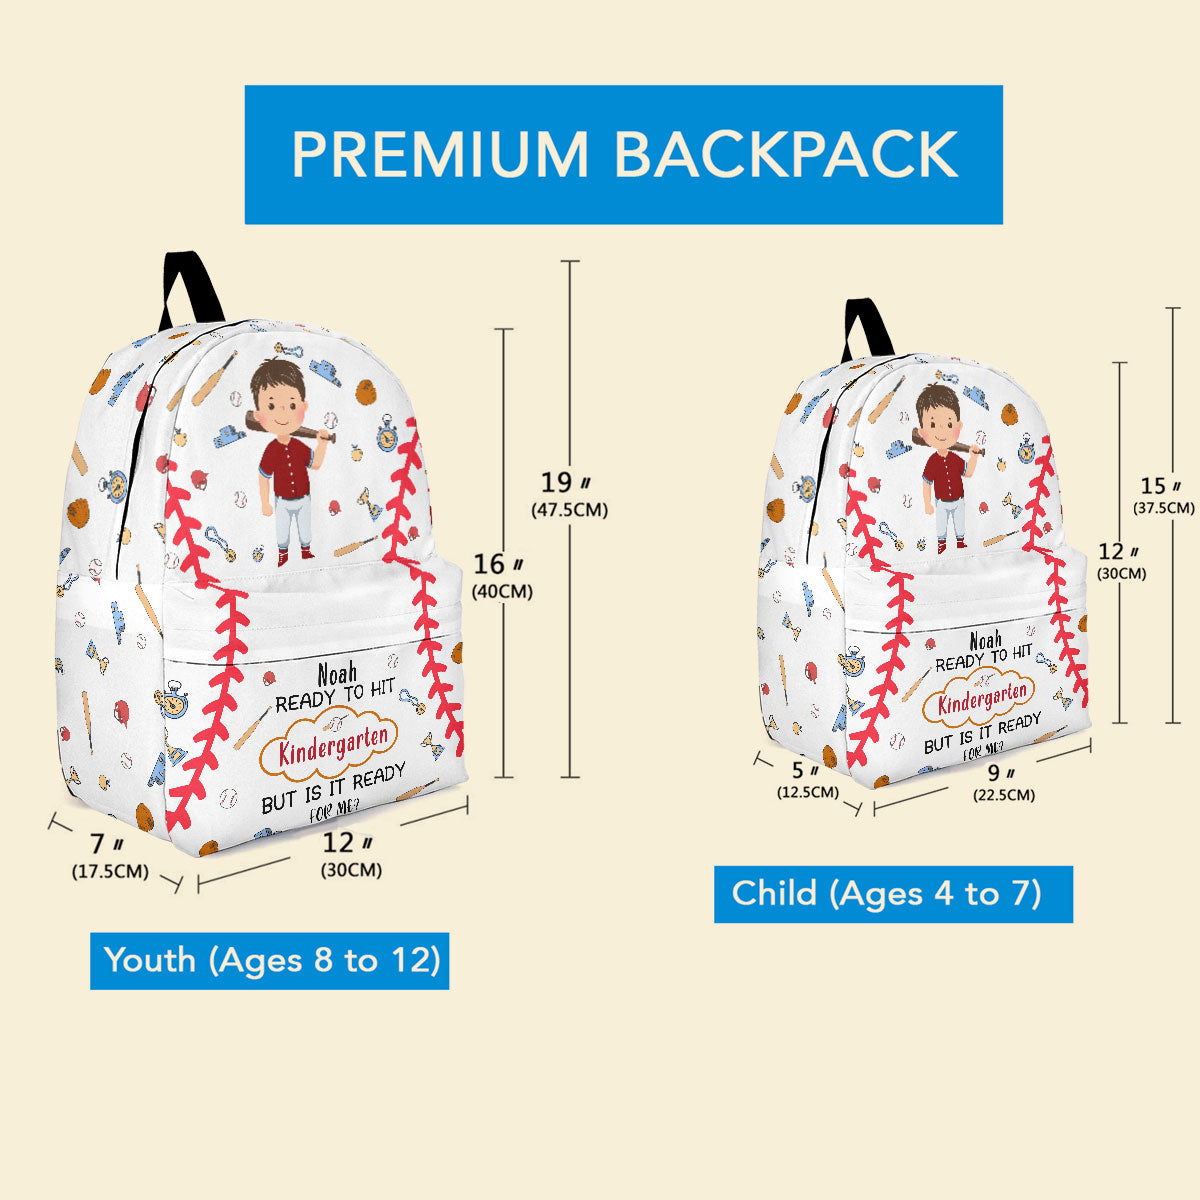 Ready To Hit Kindergarten - Personalized Backpack